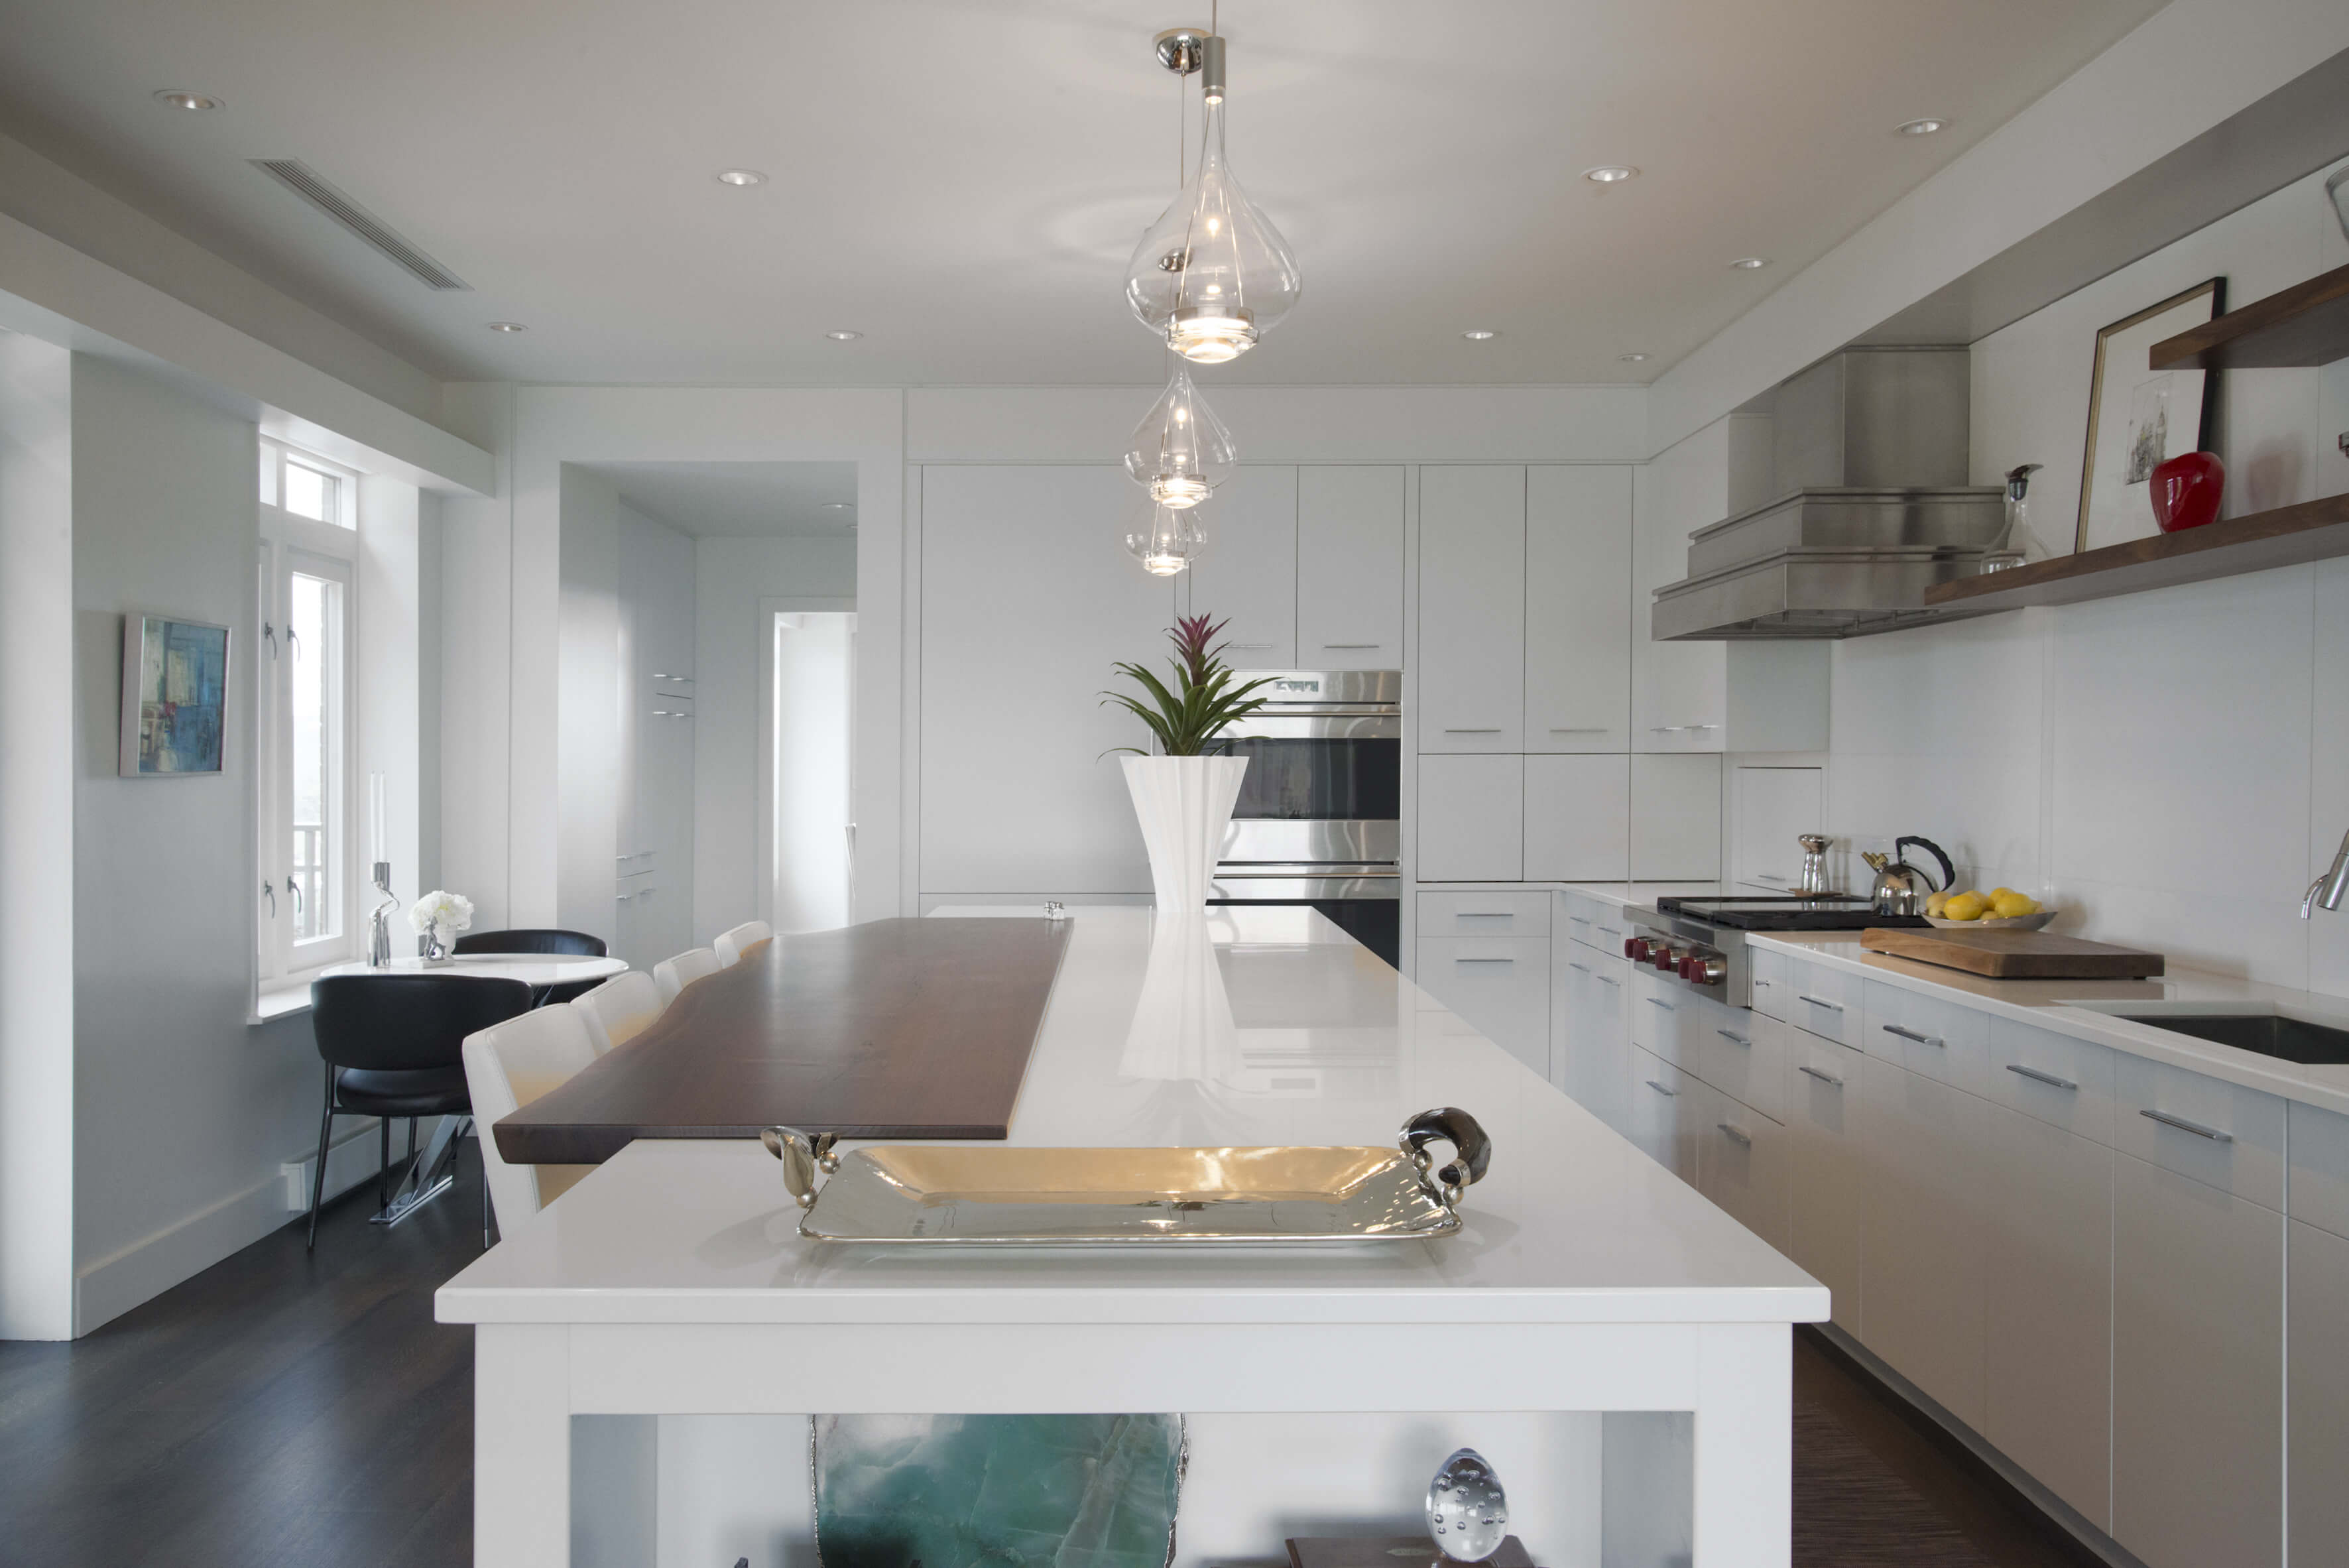 Contemporary white kitchen with embedded live-edge walnut into the kitchen island. Designed by Interior Designer, RM Interiors of Cincinnati, Oh.